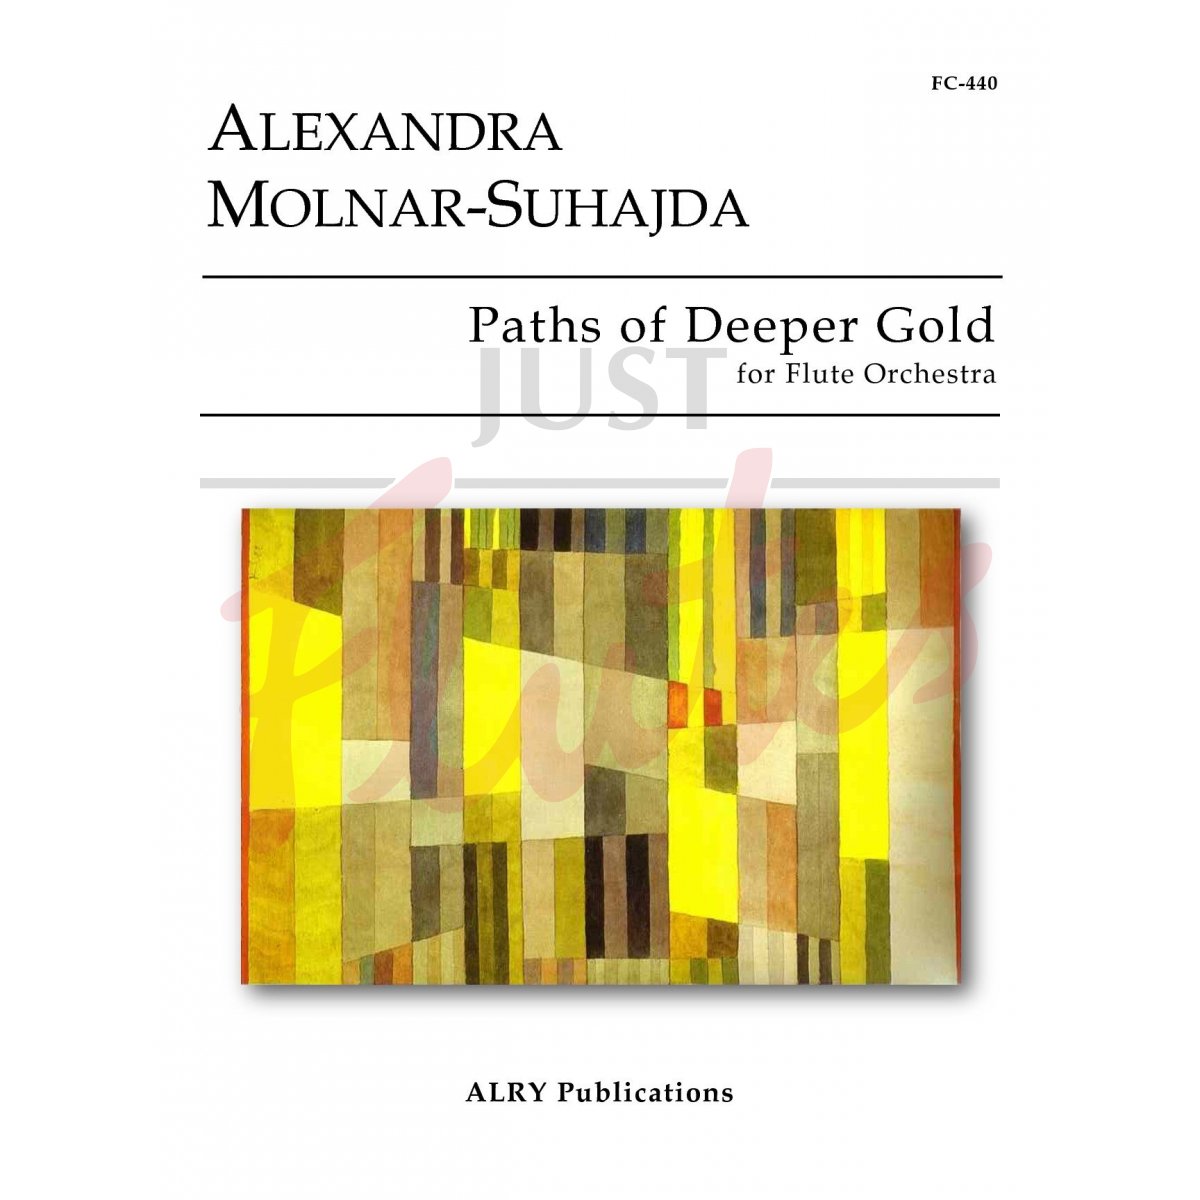 Paths of Deeper Gold for Flute Orchestra